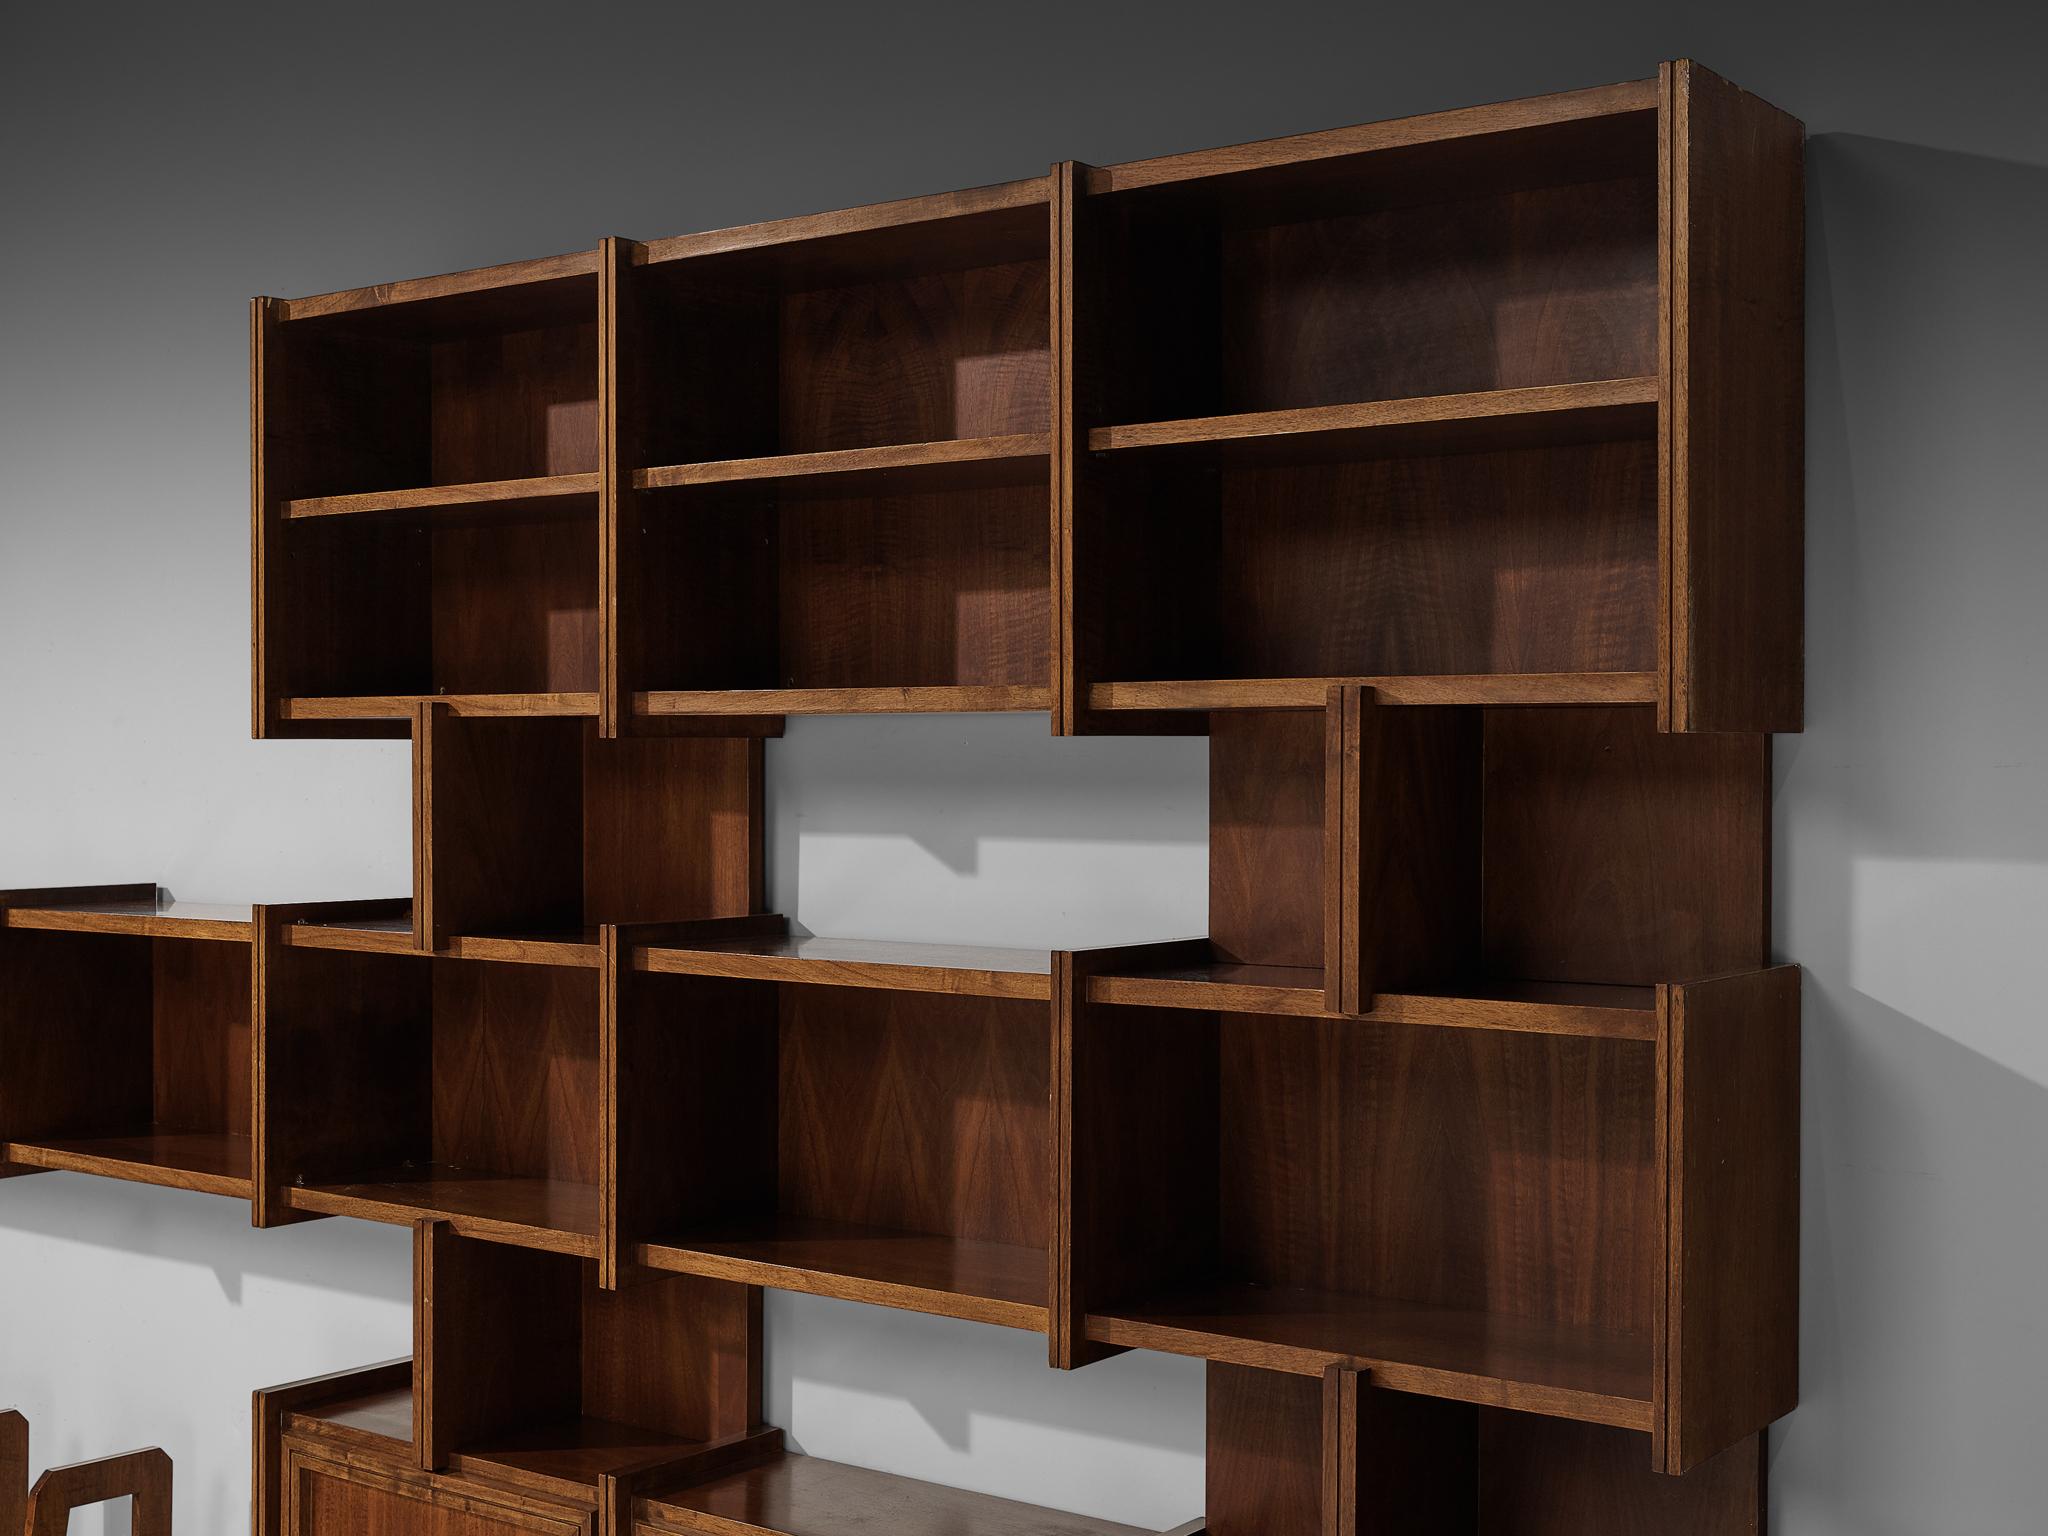 Exceptional Italian Library Unit With Stairs in Walnut For Sale at 1stDibs